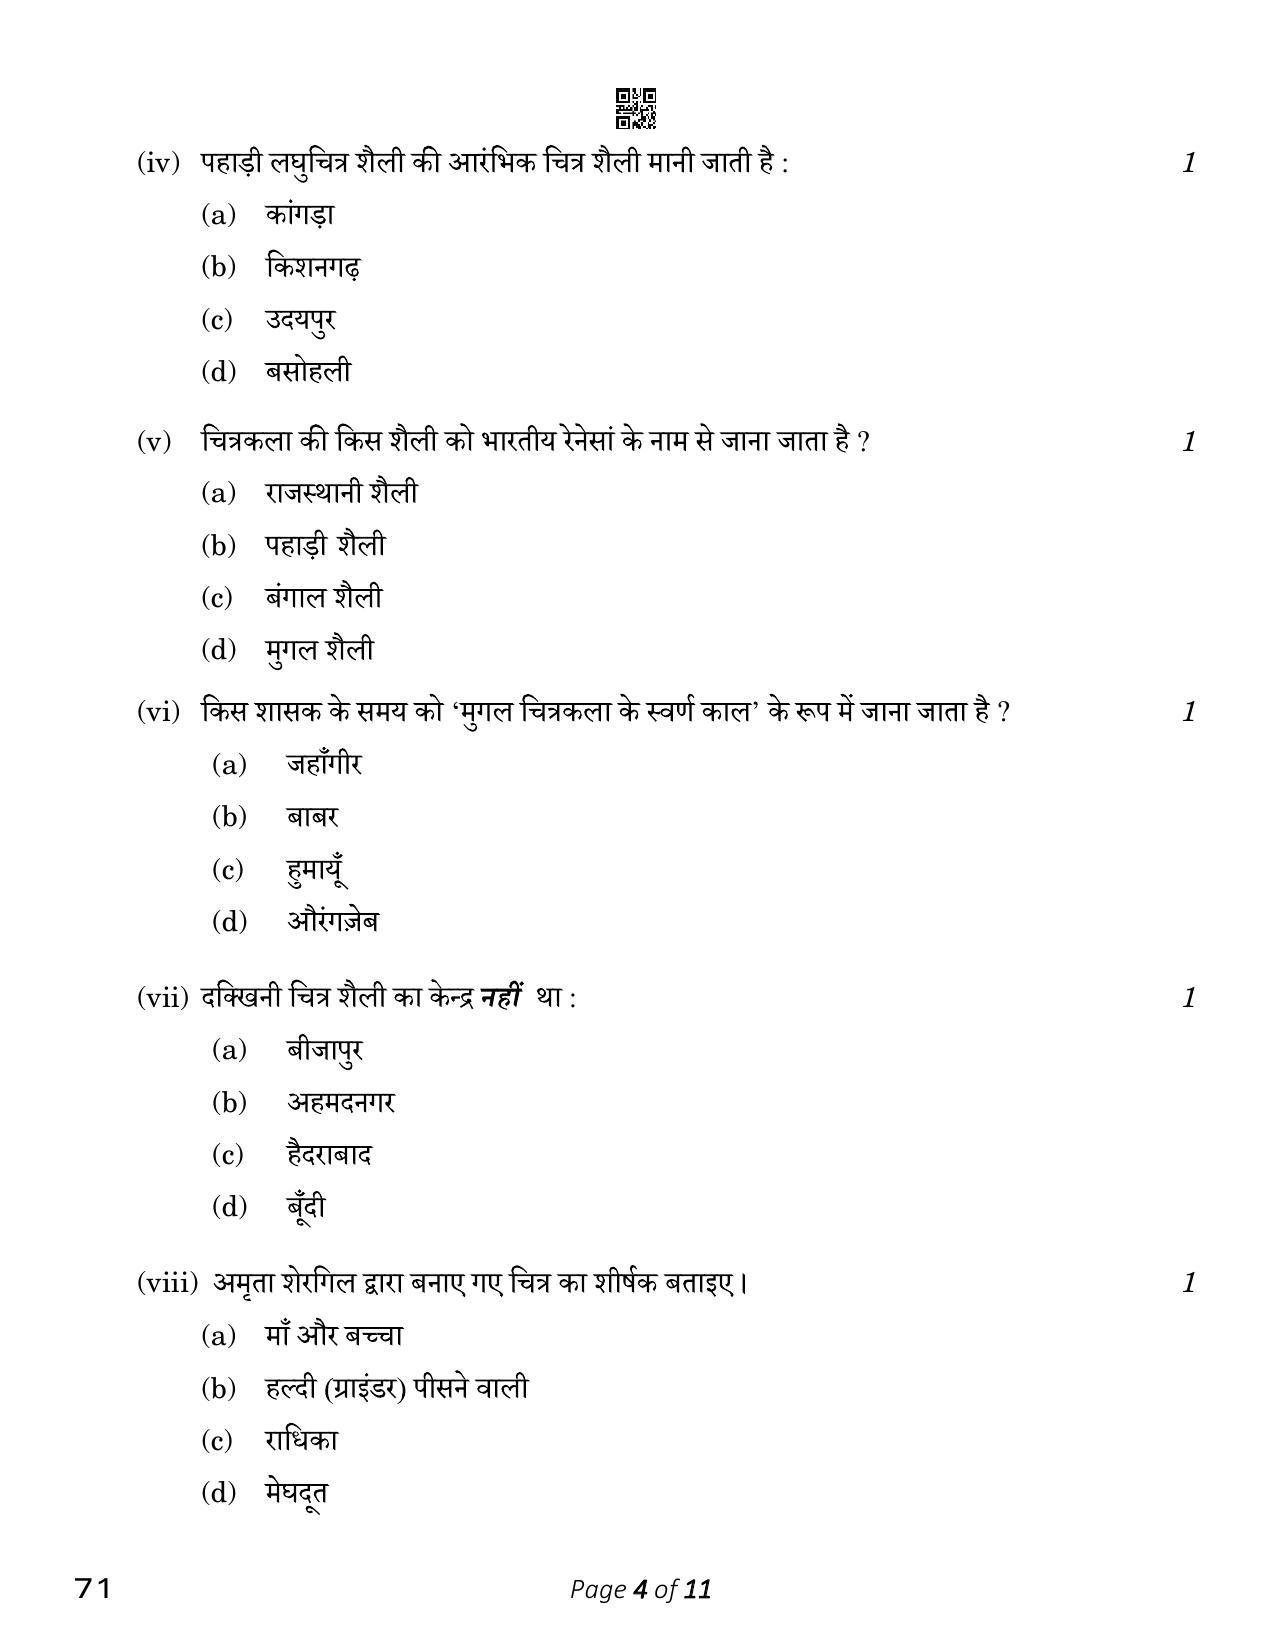 CBSE Class 12 Painting (Compartment) 2023 Question Paper - Page 4